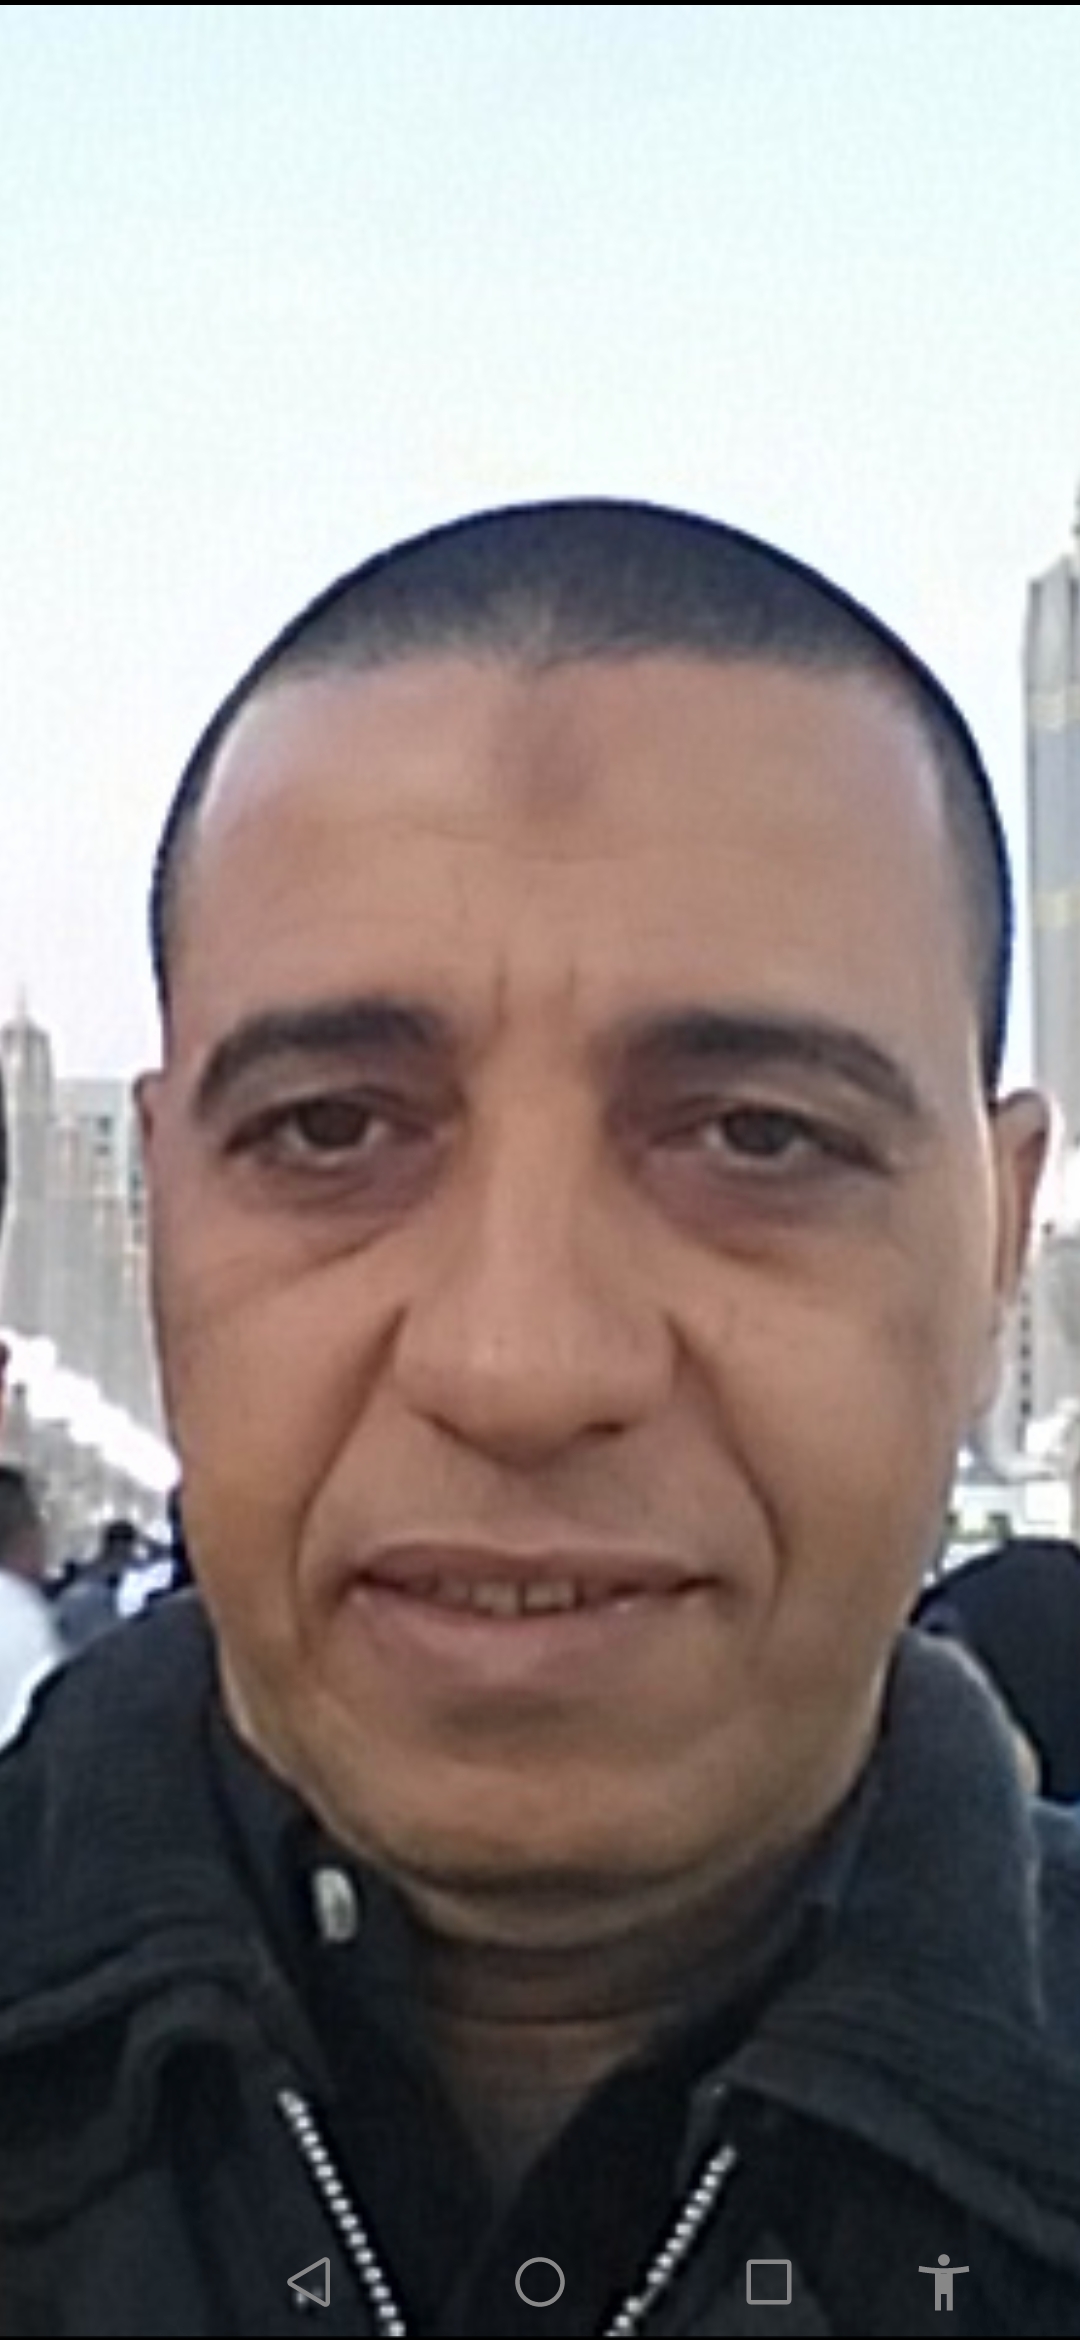 MohammefIssaMohmmed Profile Picture